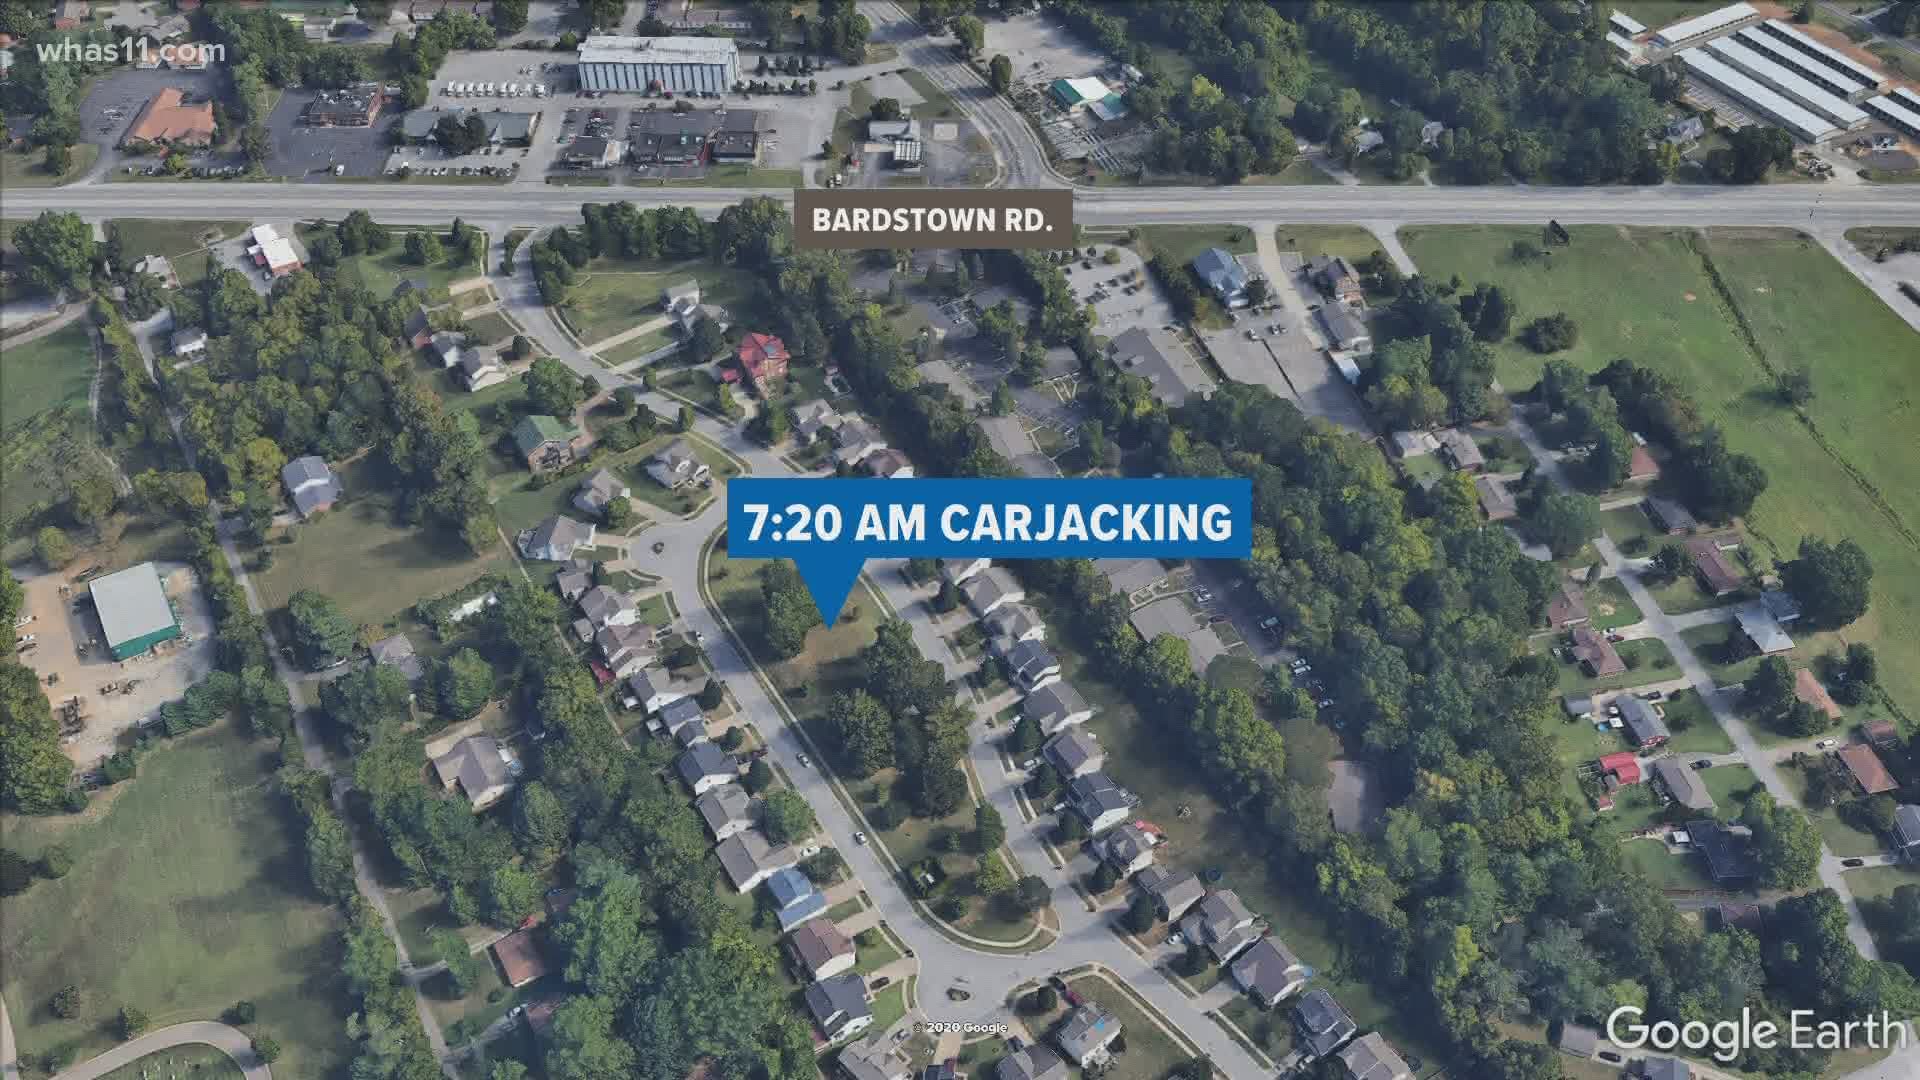 Police said the adult and juvenile were taken into custody after a carjacking later leading to a robbery in Jefferson County on Tuesday.